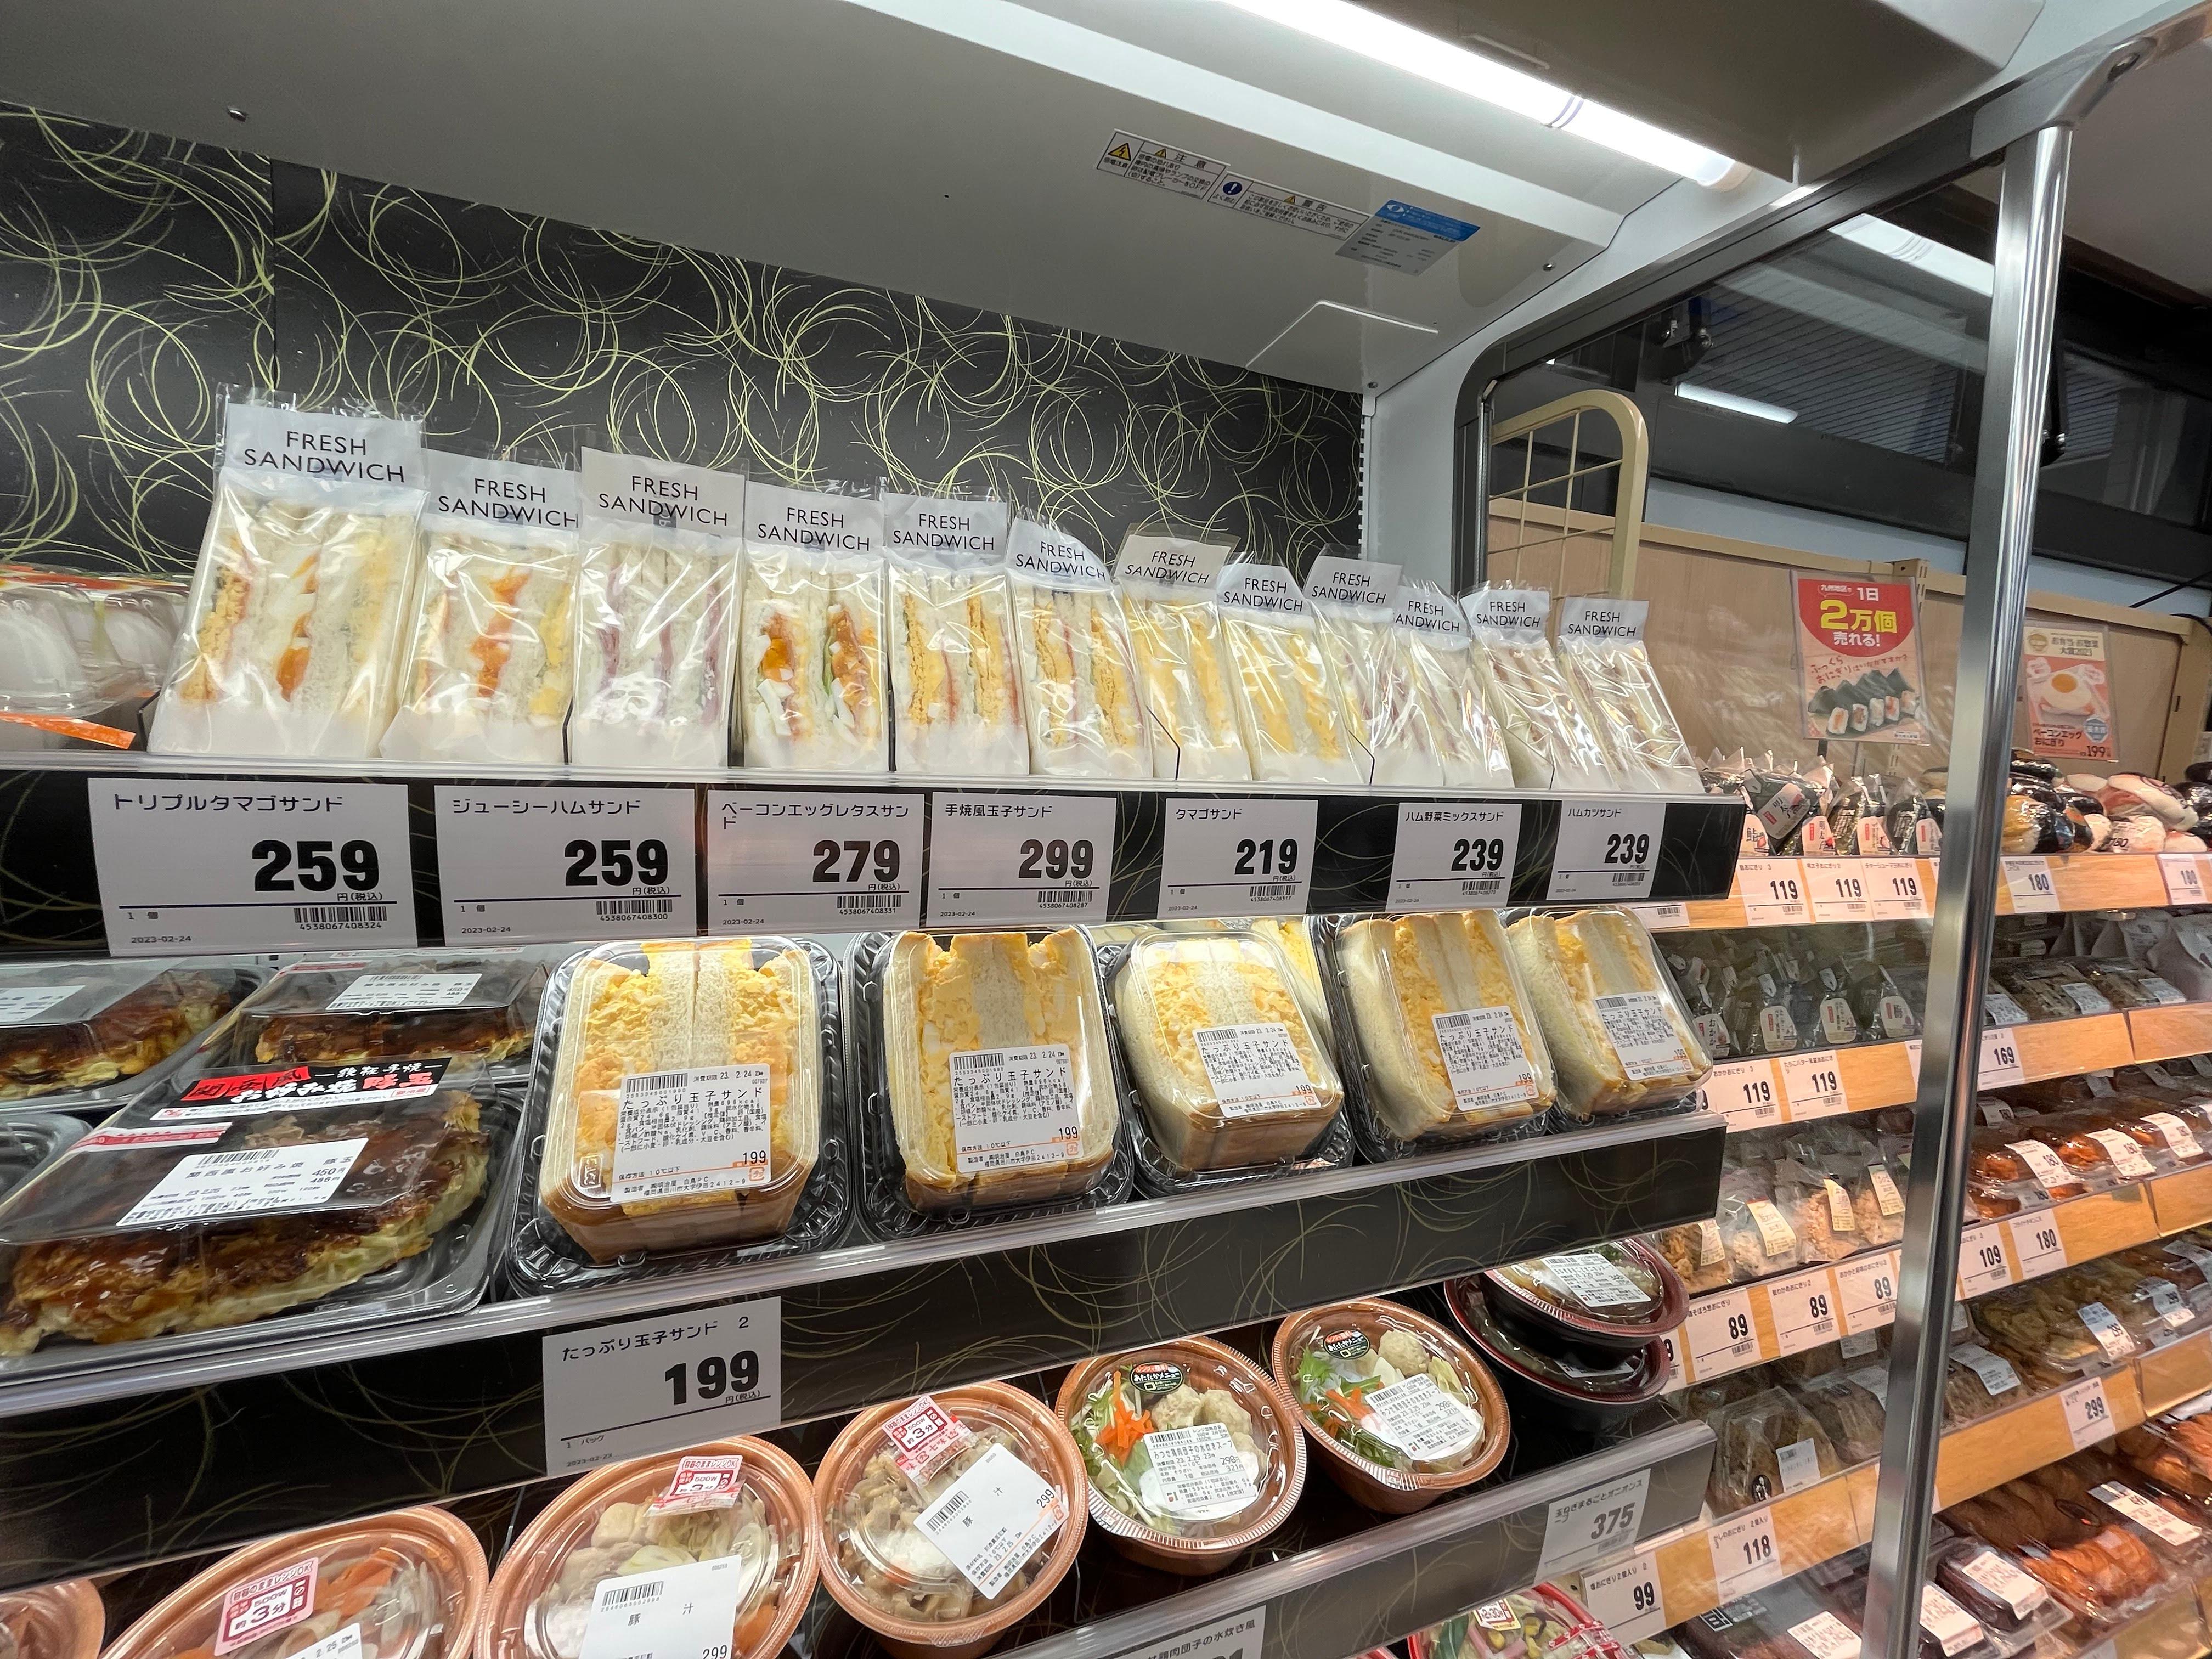 Images TRIAL GO原田1丁目店